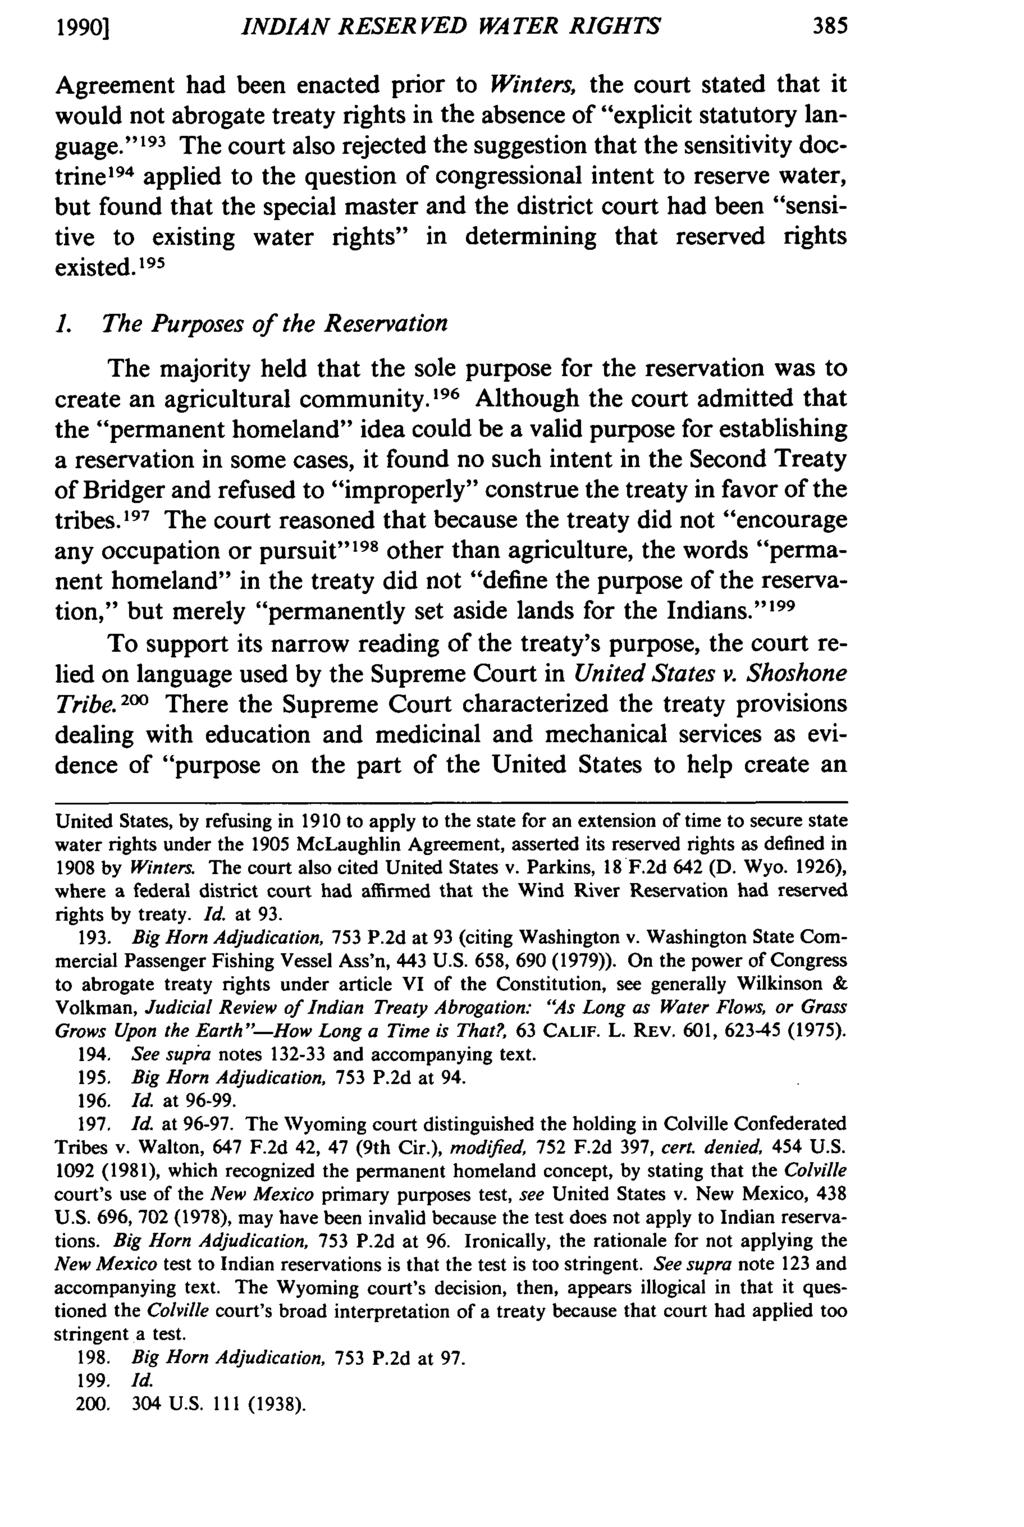 1990] INDIAN RESERVED WATER RIGHTS Agreement had been enacted prior to Winters, the court stated that it would not abrogate treaty rights in the absence of "explicit statutory language.